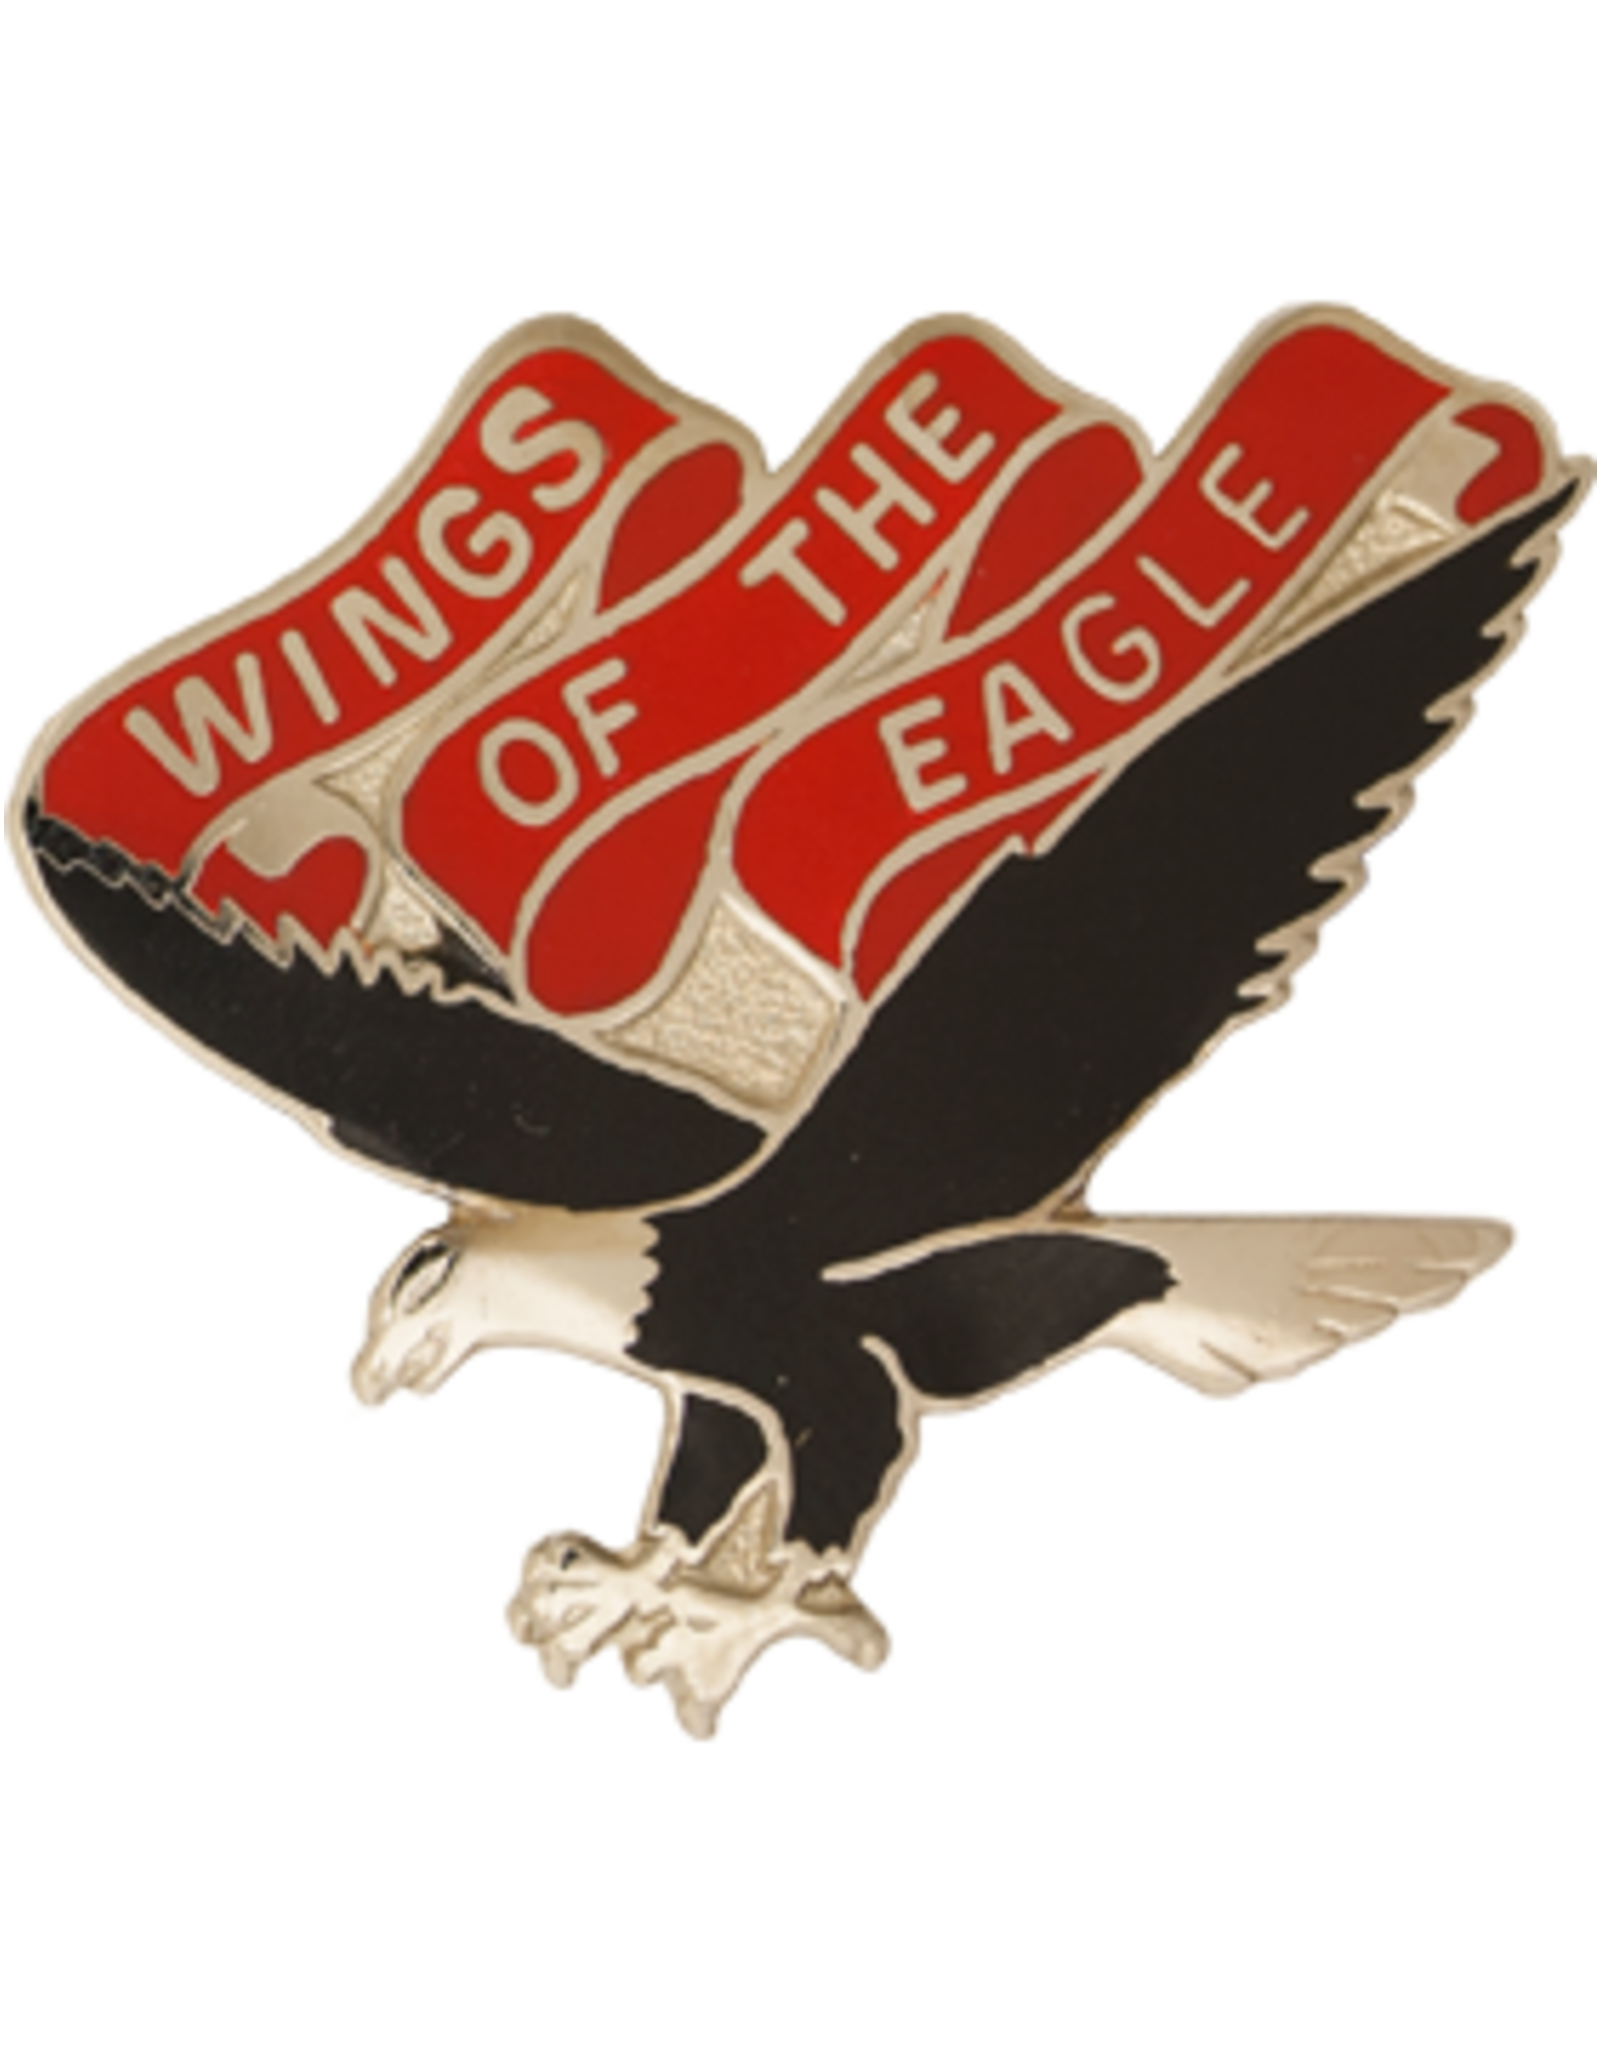 101st Aviation Crest - Wings of the Eagle